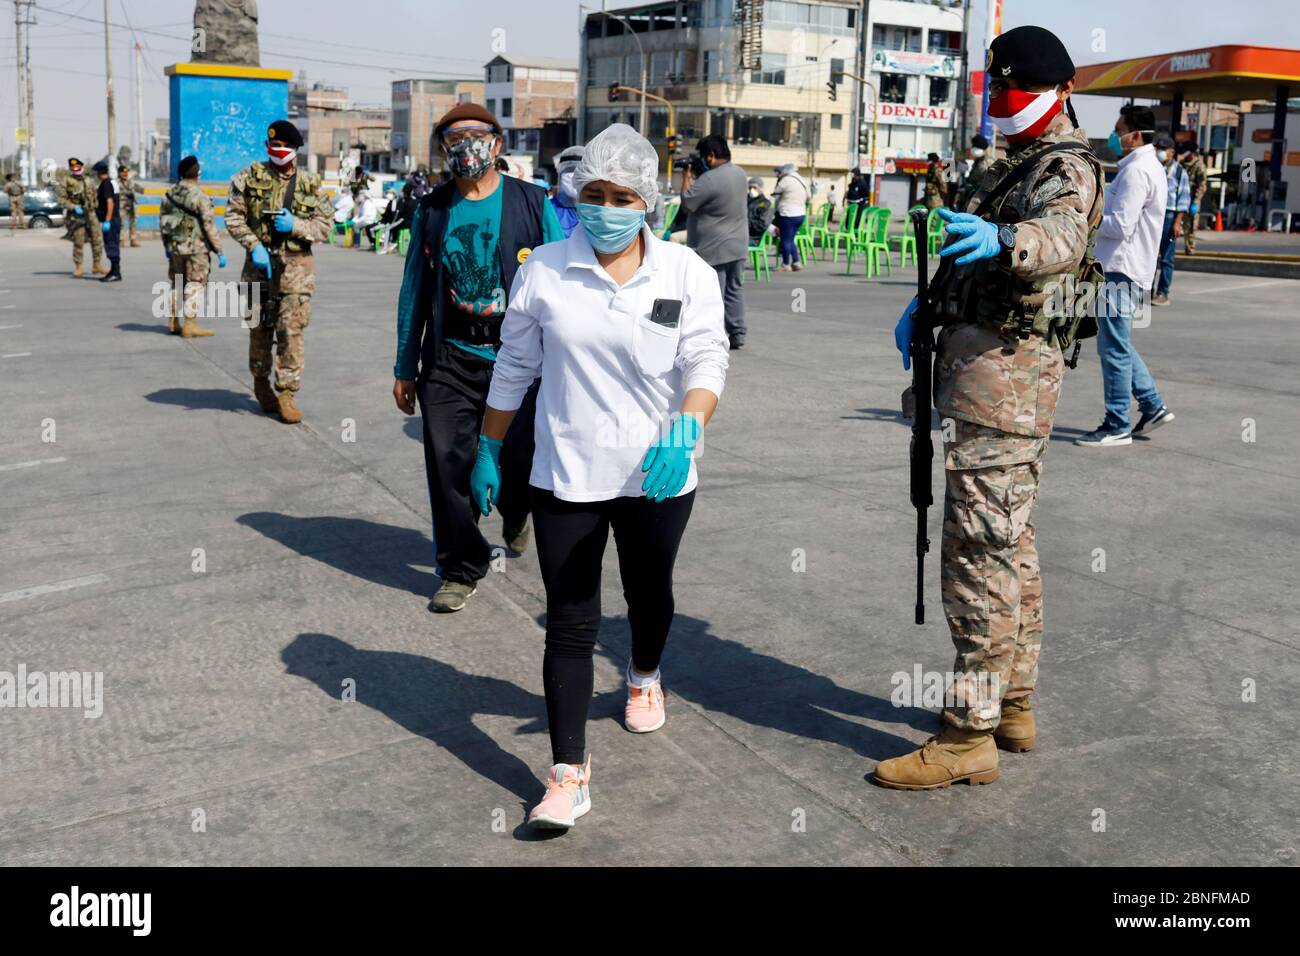 Lima, Peru. 14th May, 2020. A Peruvian soldier guard as market vendors wait in line for blood rapid diagnostic tests for the new coronavirus disease, COVID-19 at a market in Villa El Salvador Credit: Mariana Bazo/ZUMA Wire/Alamy Live News Stock Photo